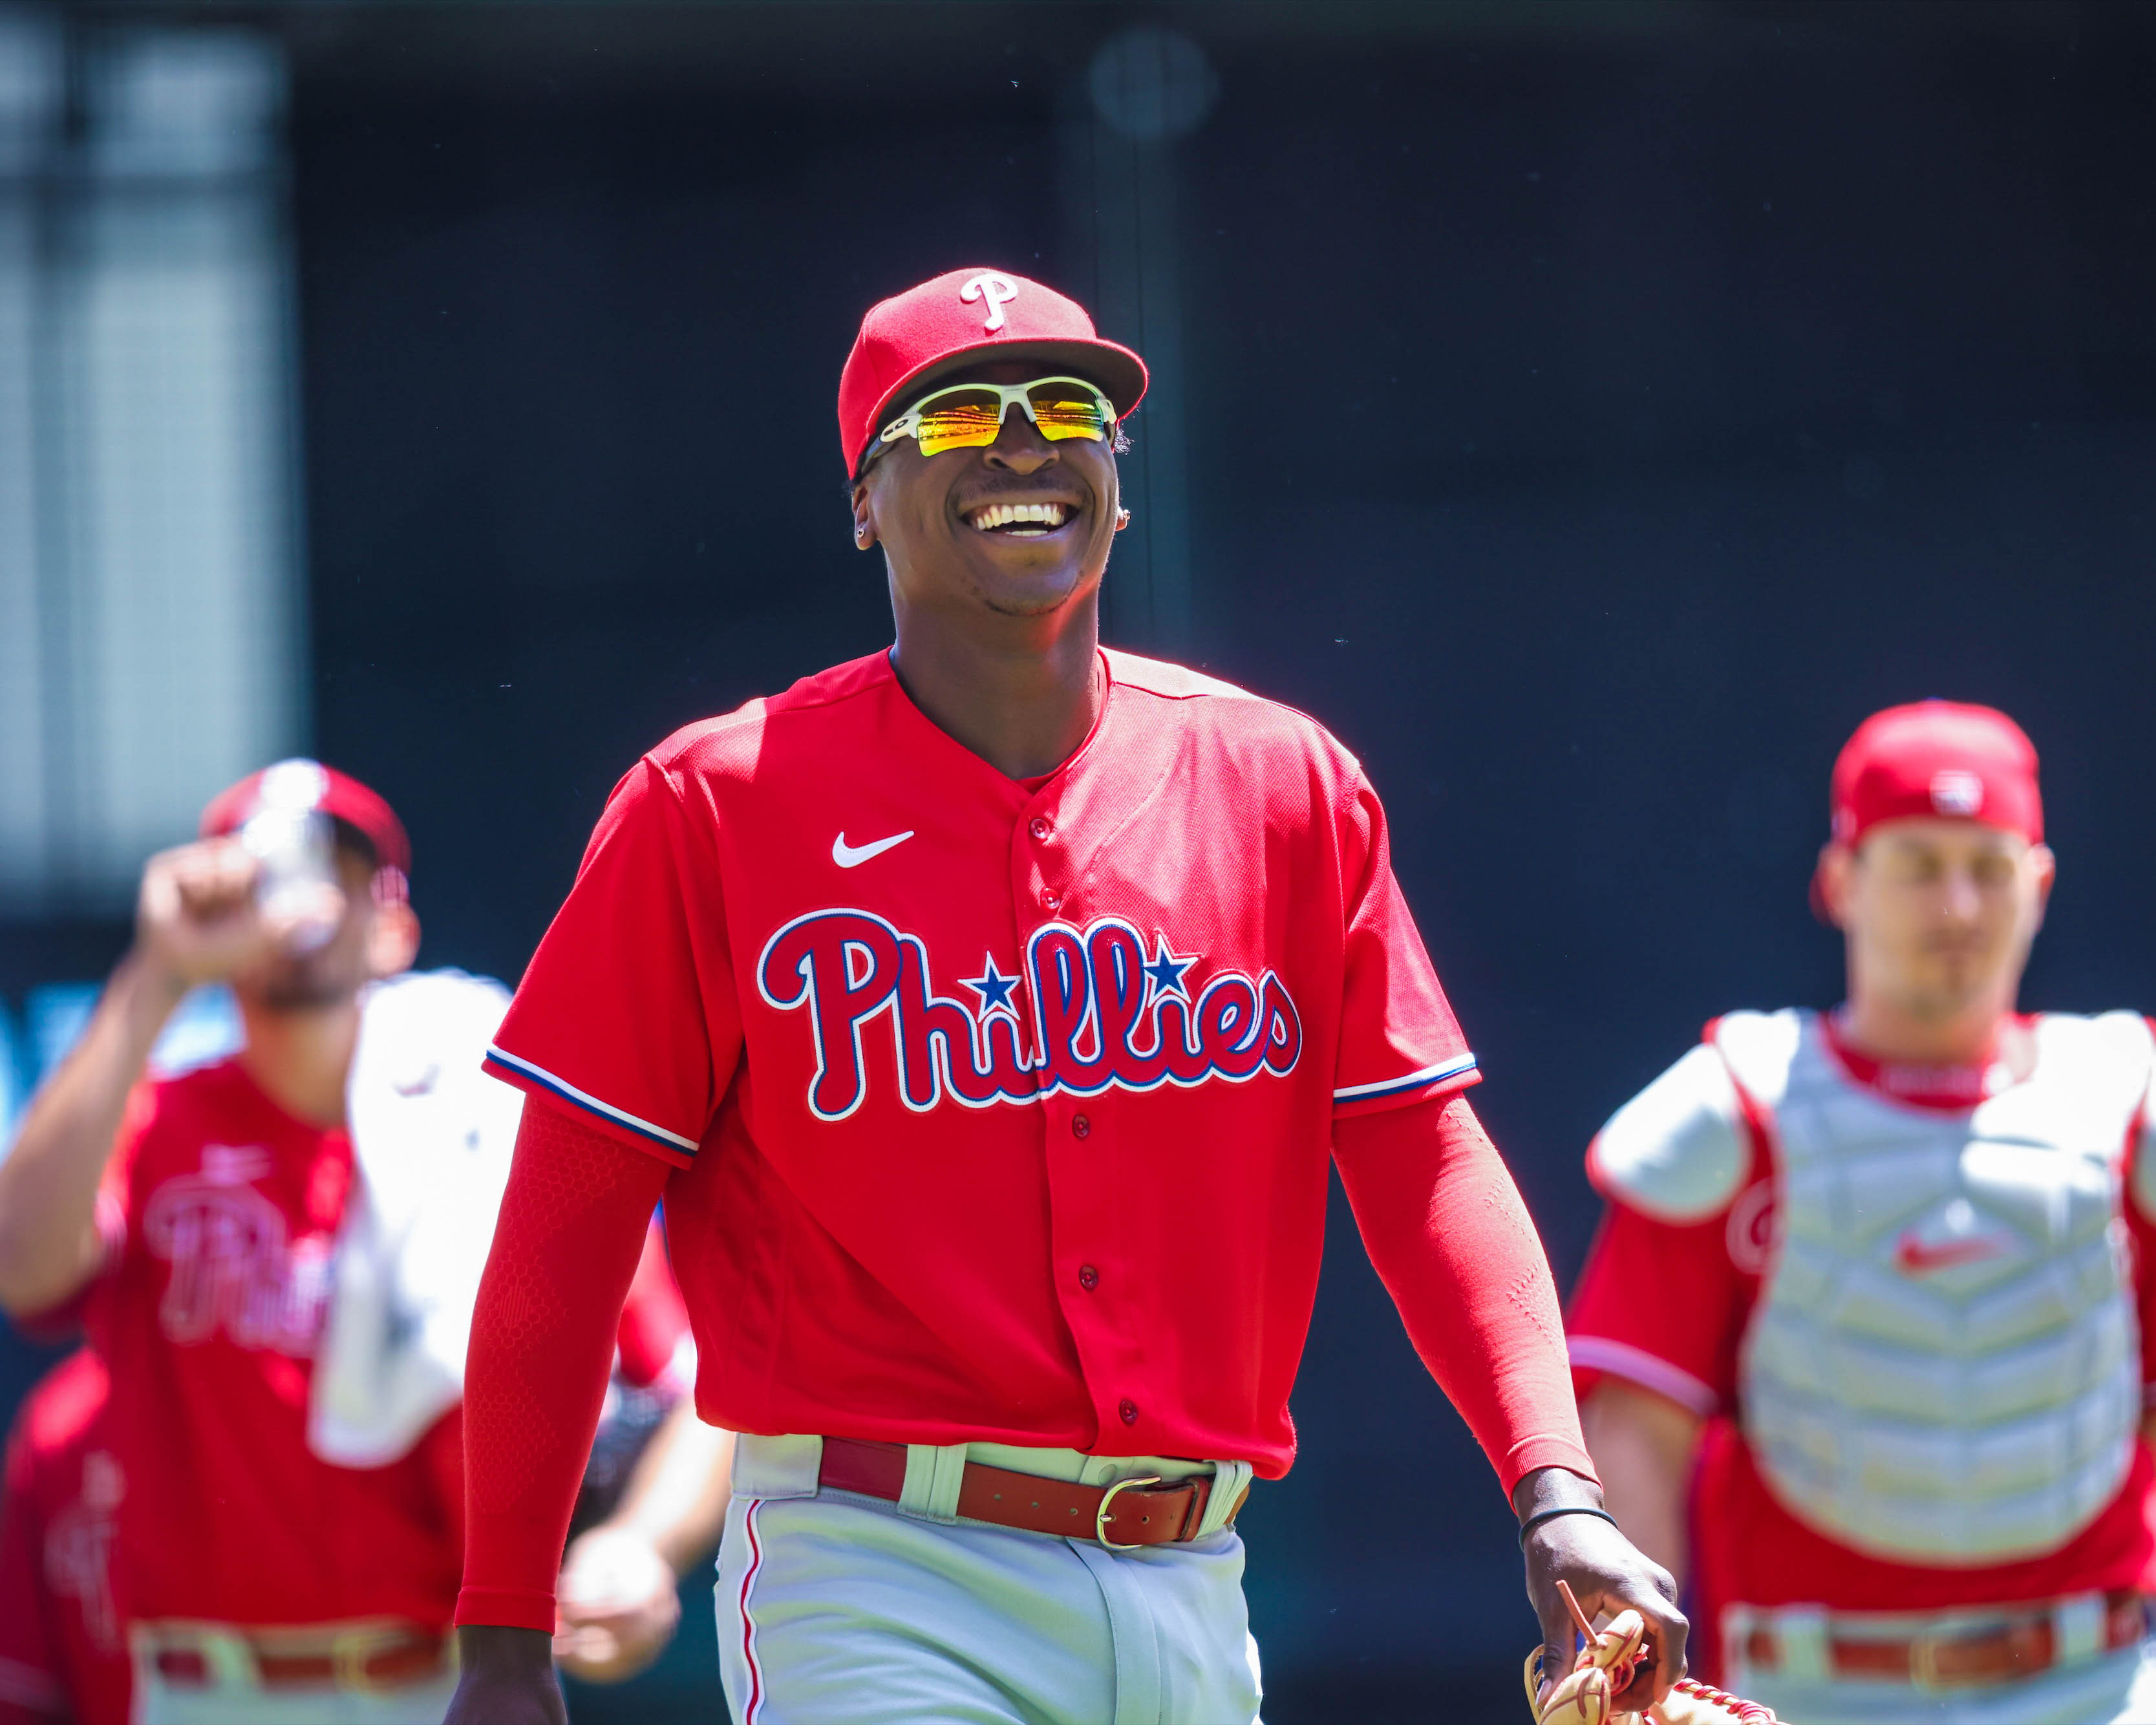 Philadelphia Phillies on X: Brewed up a sweep #RingTheBell https